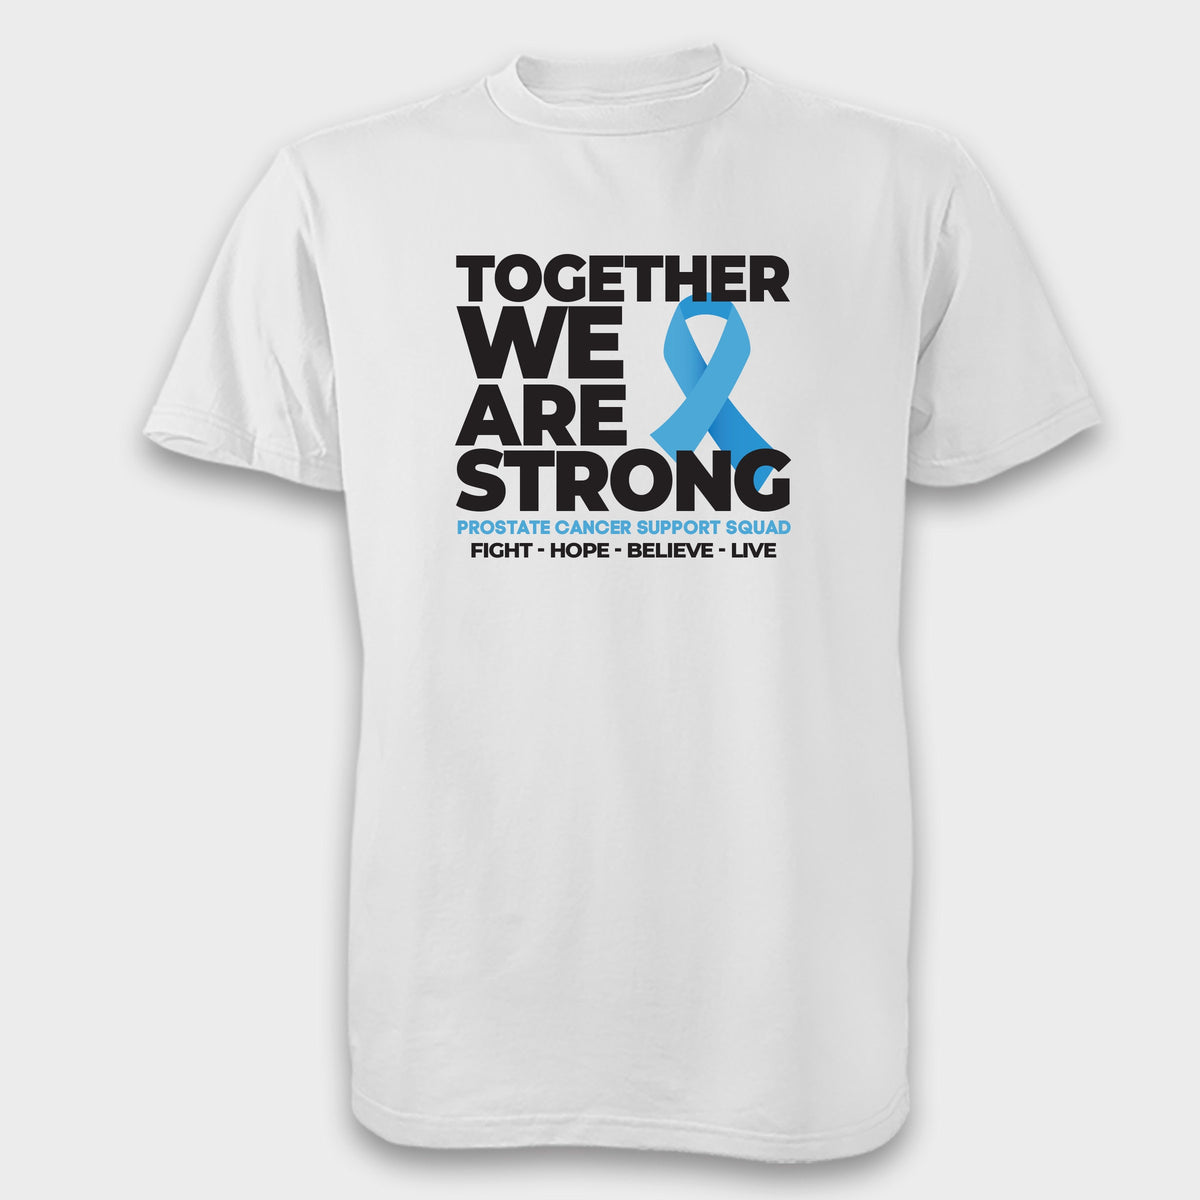 Together We are Strong - Tee